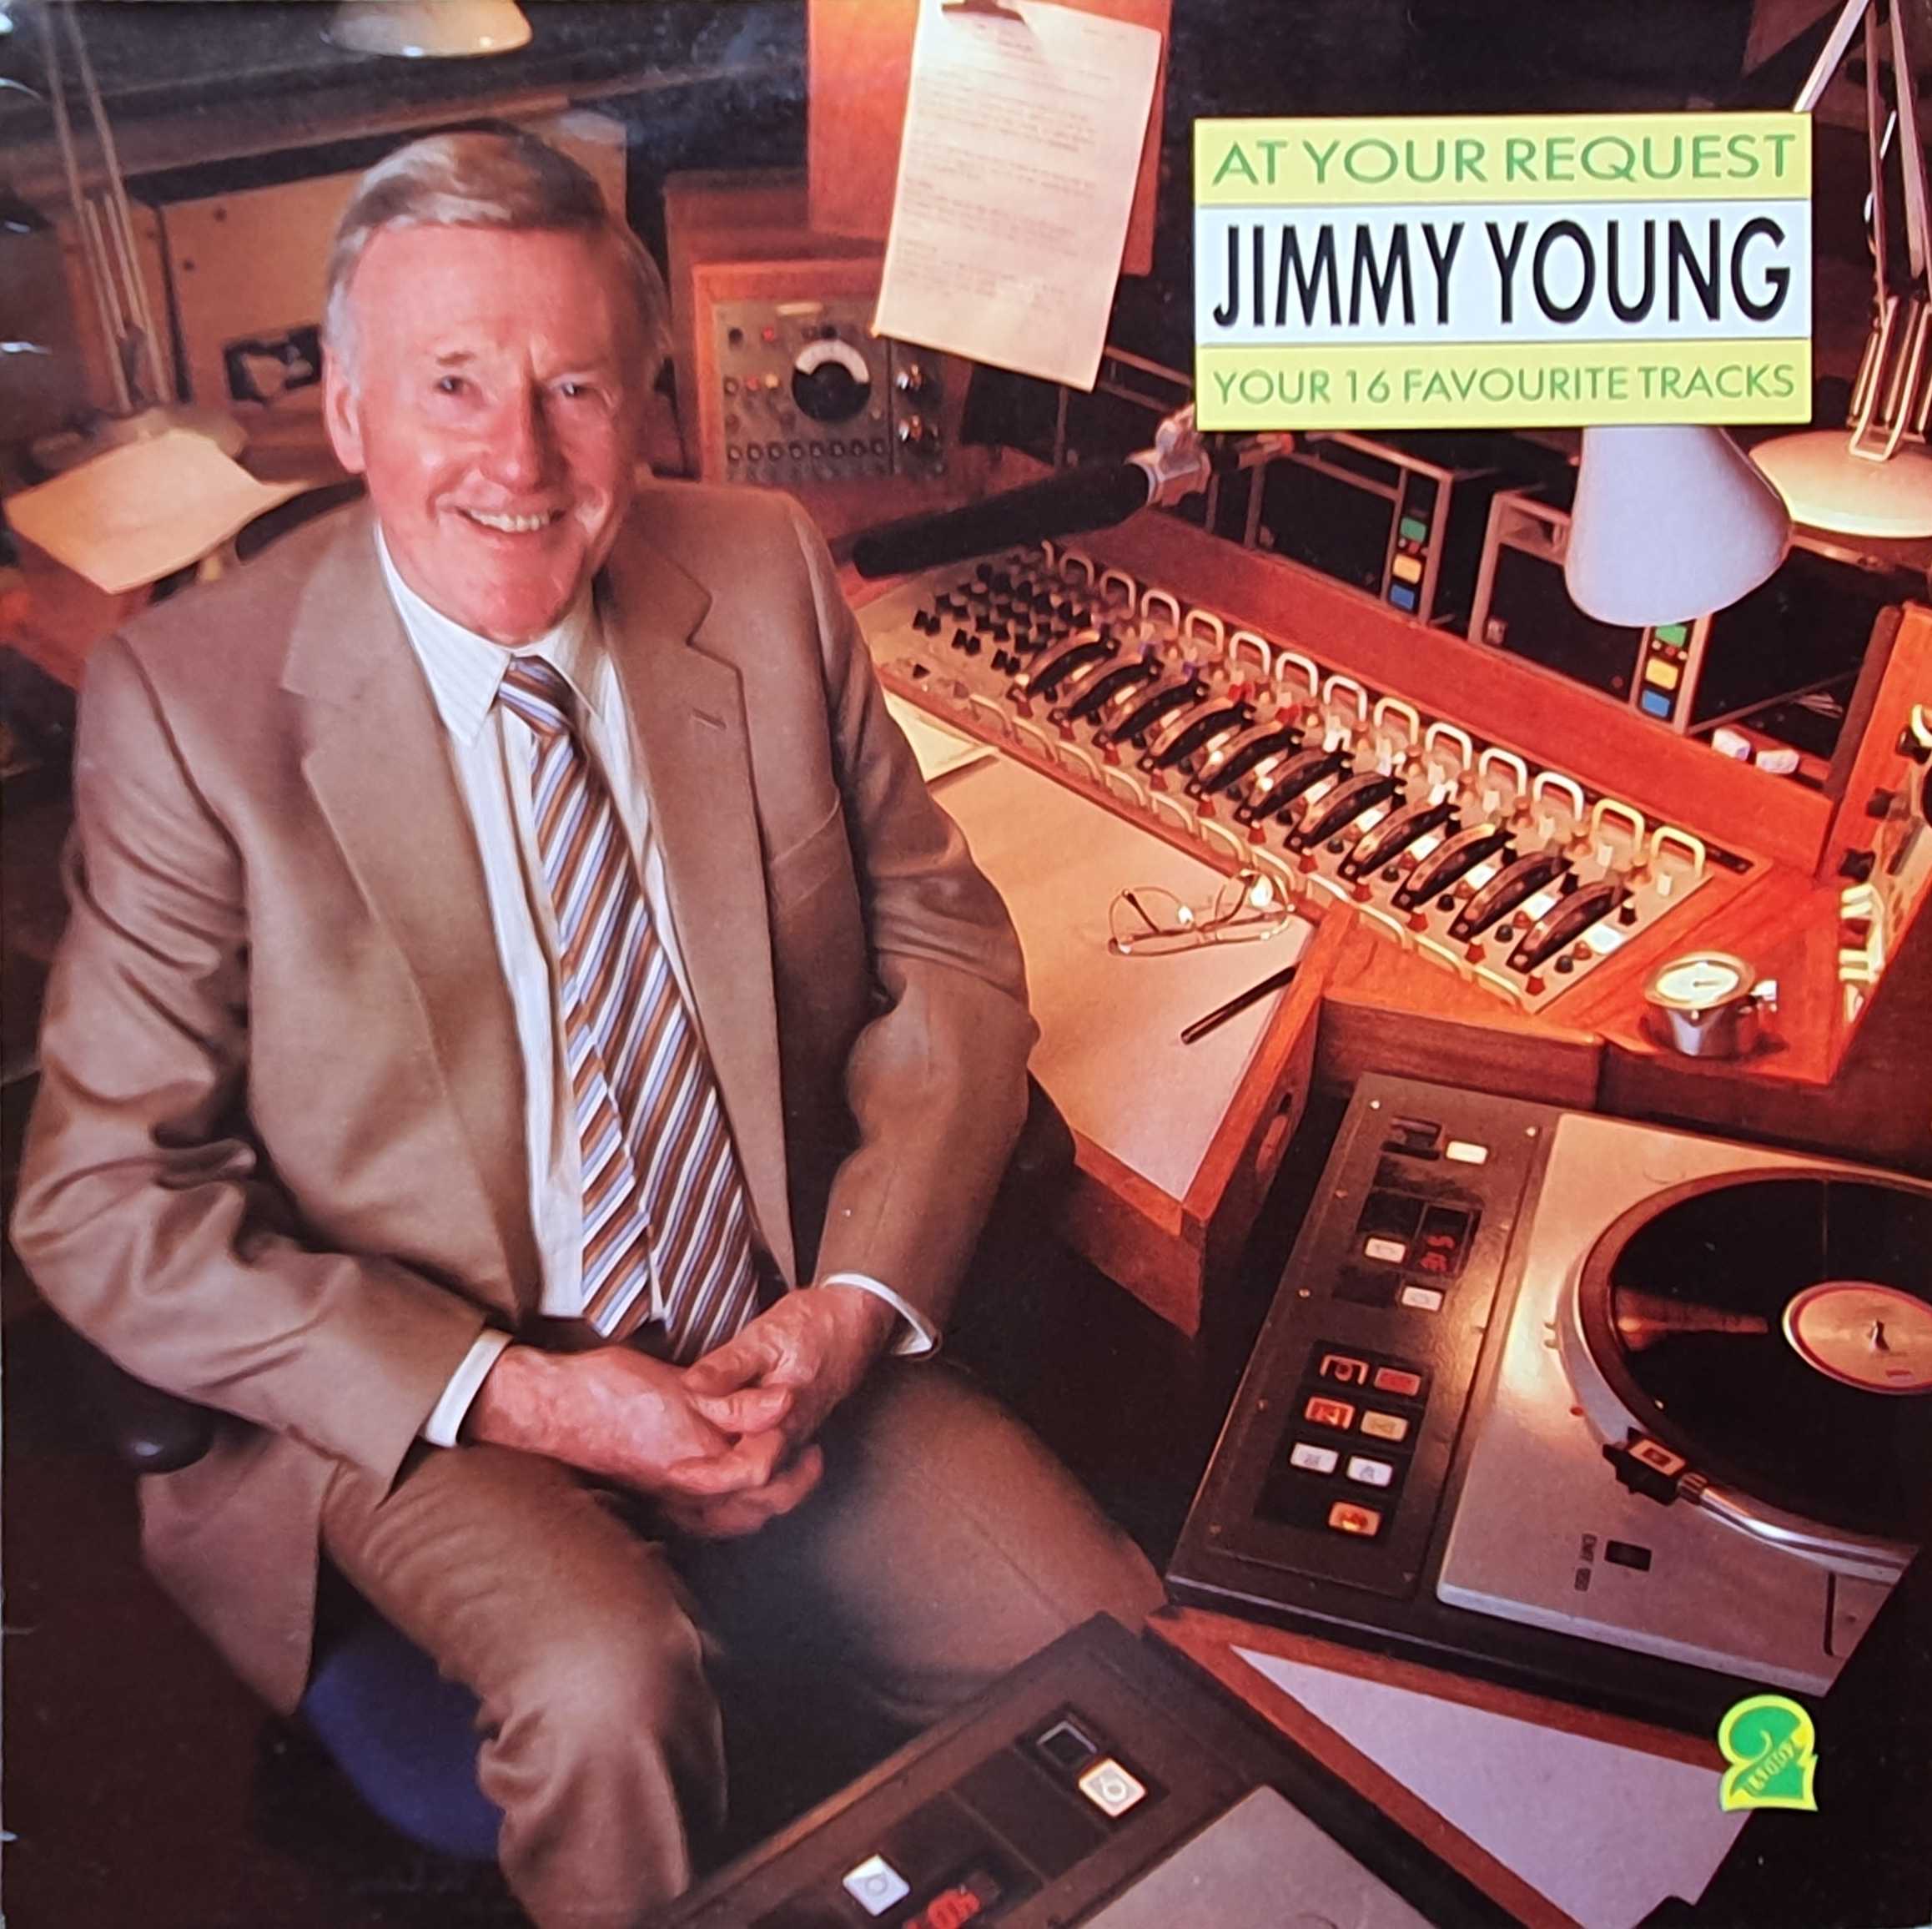 Picture of REN 712 At your request - Jimmy Young by artist Various from the BBC albums - Records and Tapes library